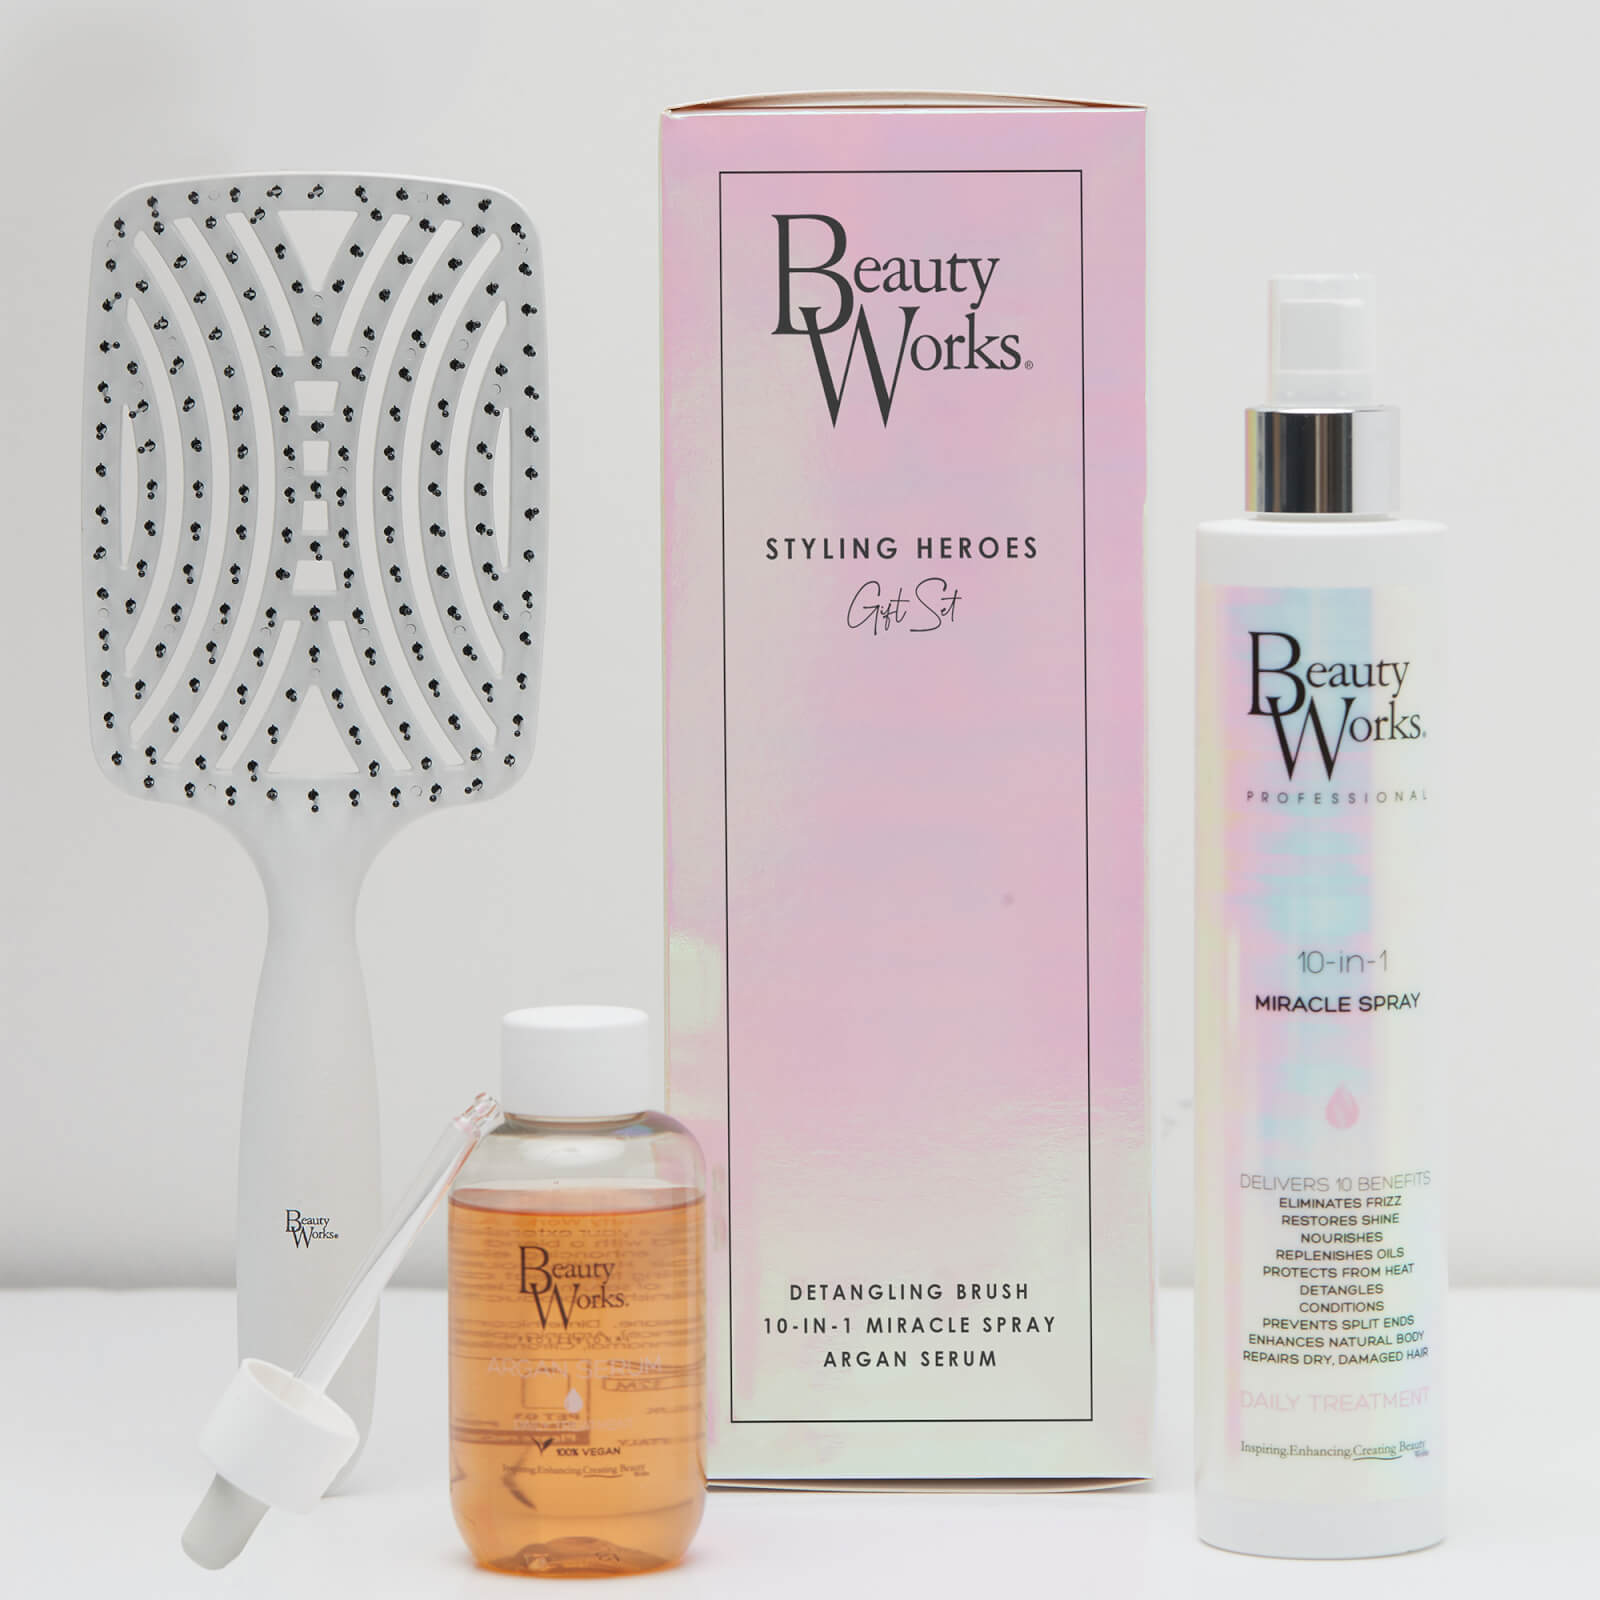 Beauty Works Styling Heros Gift Set